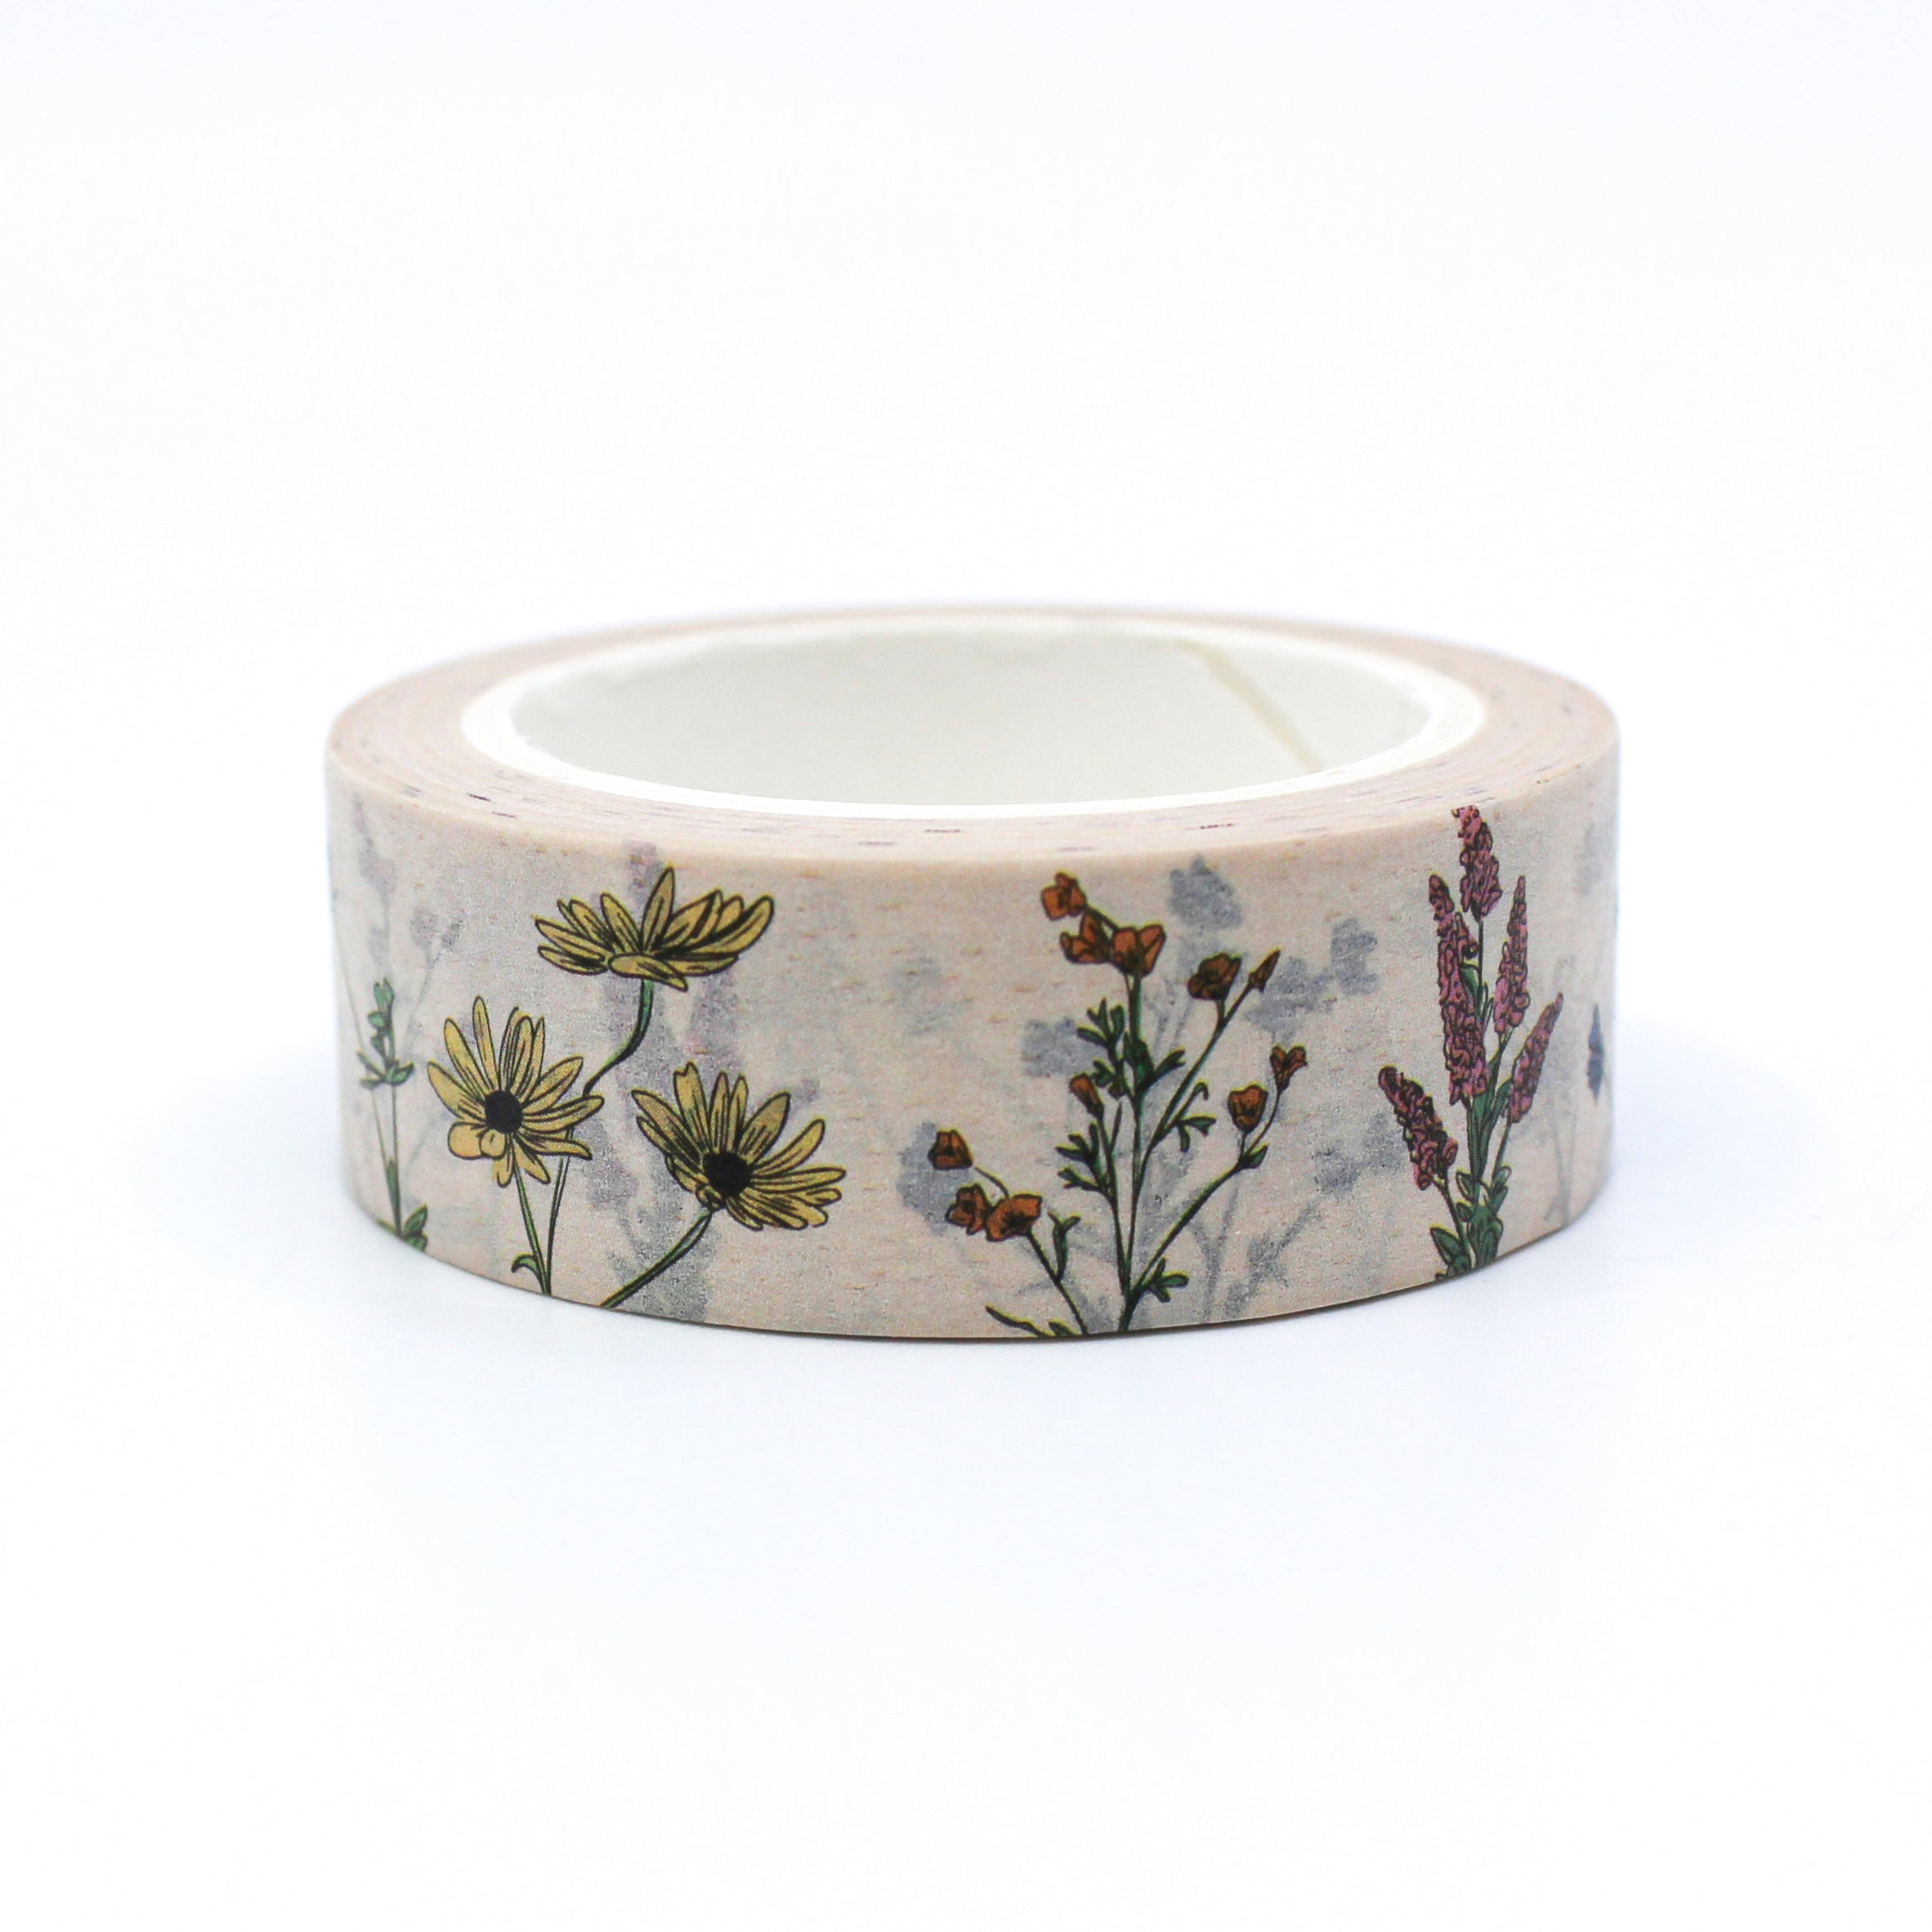 This is a collection of vintage botanical florals washi tape from BBB Supplies Craft Shop